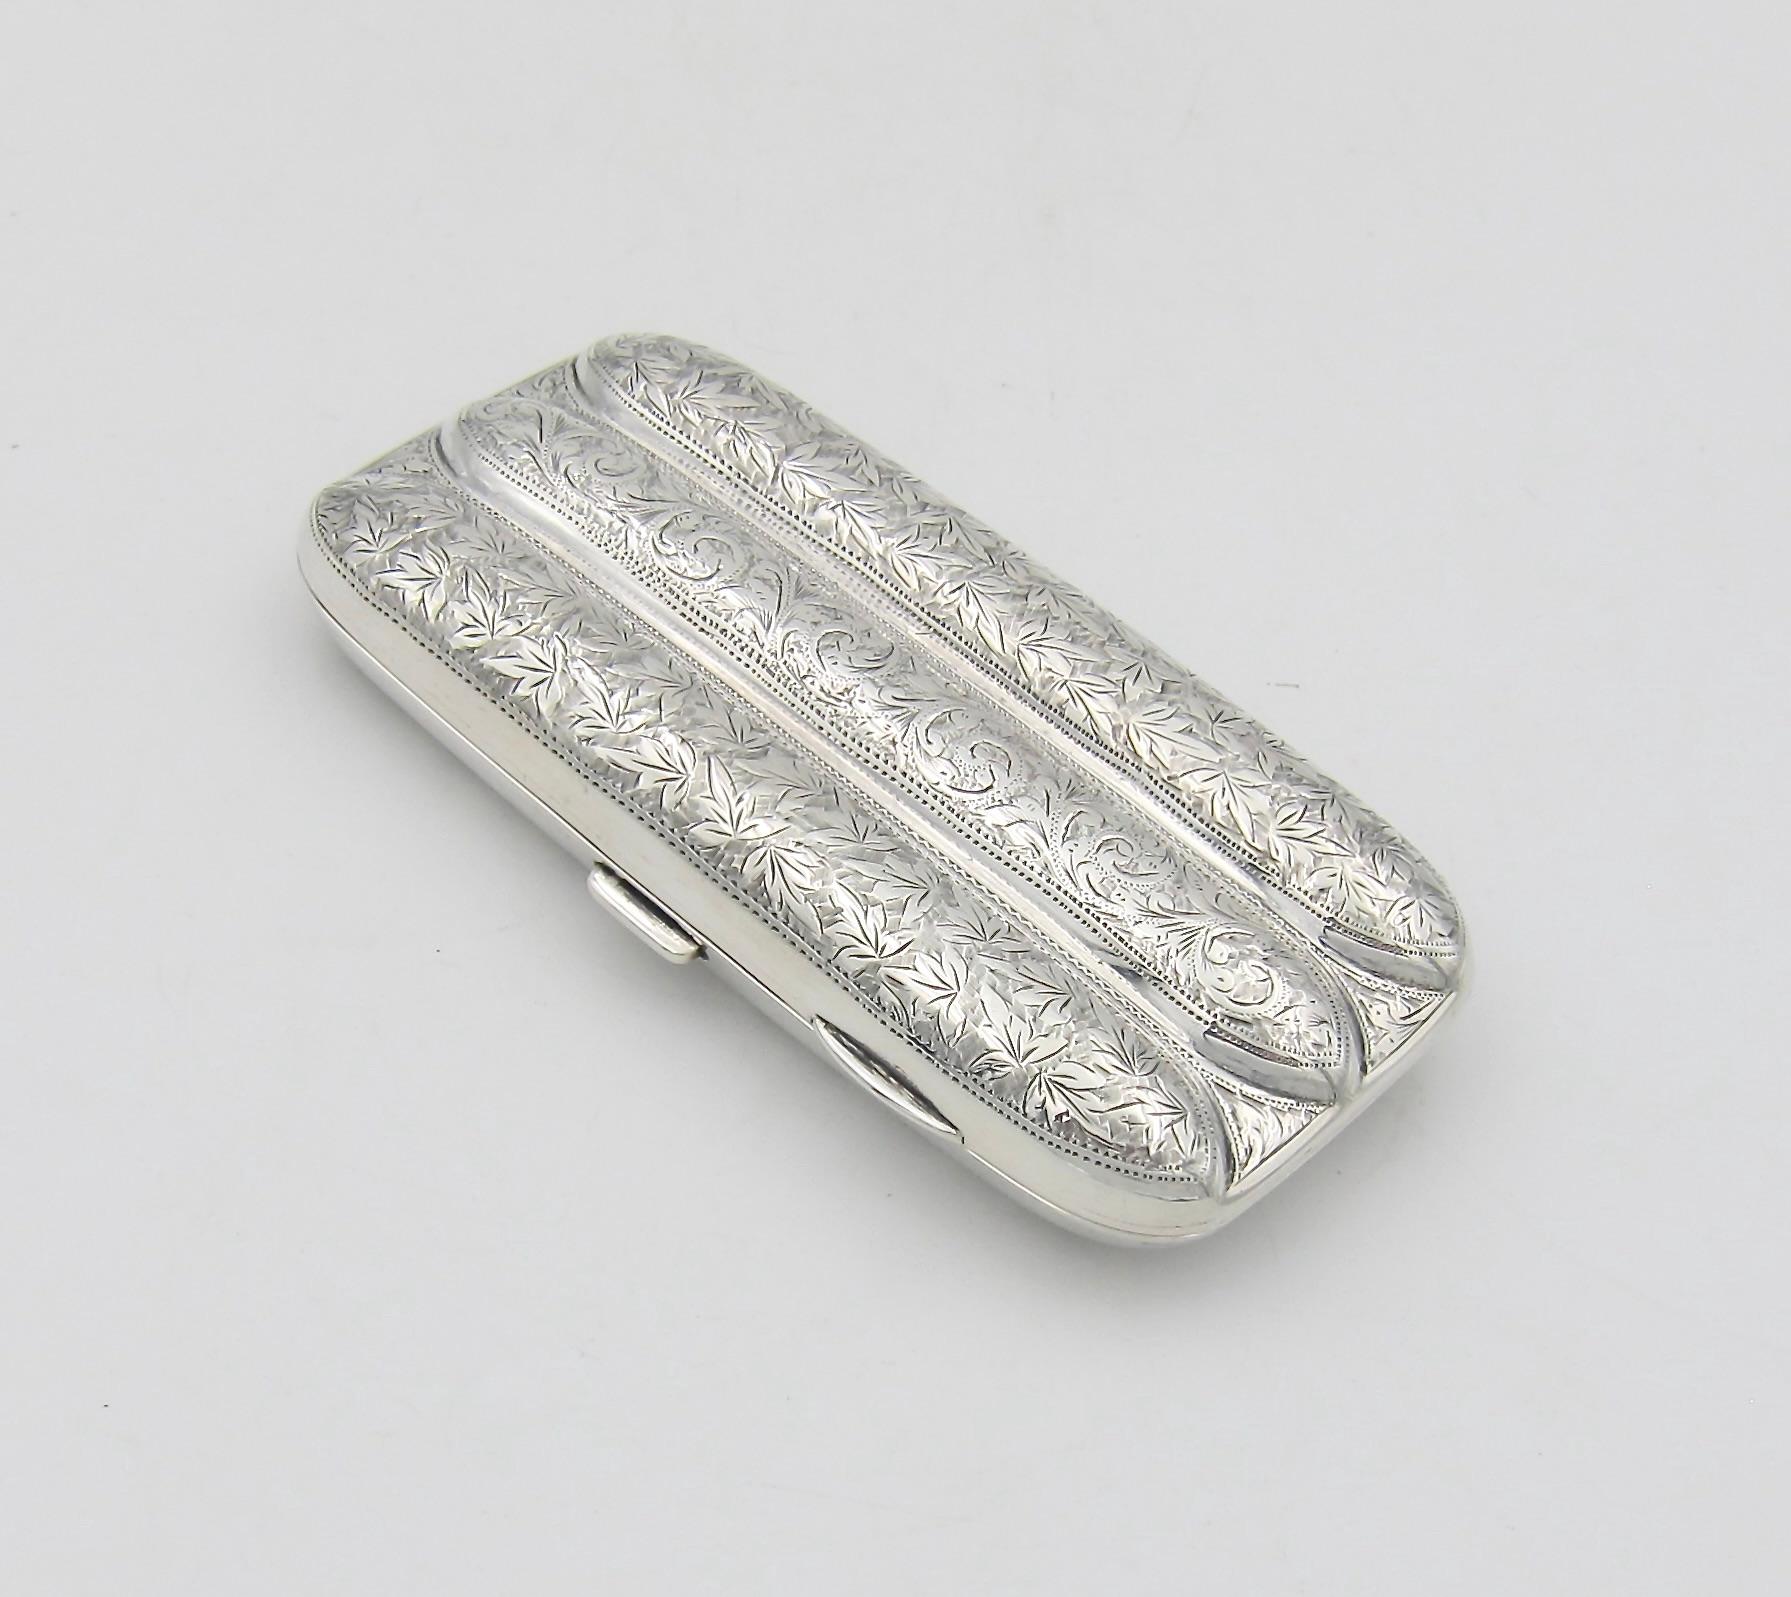 An antique Edwardian sterling silver three-tube cigar case from William Aitken of Chester, United Kingdom, date marked for 1901. The elegant hinged case opens with a press catch on one side revealing the original gilded interior. The exterior of the